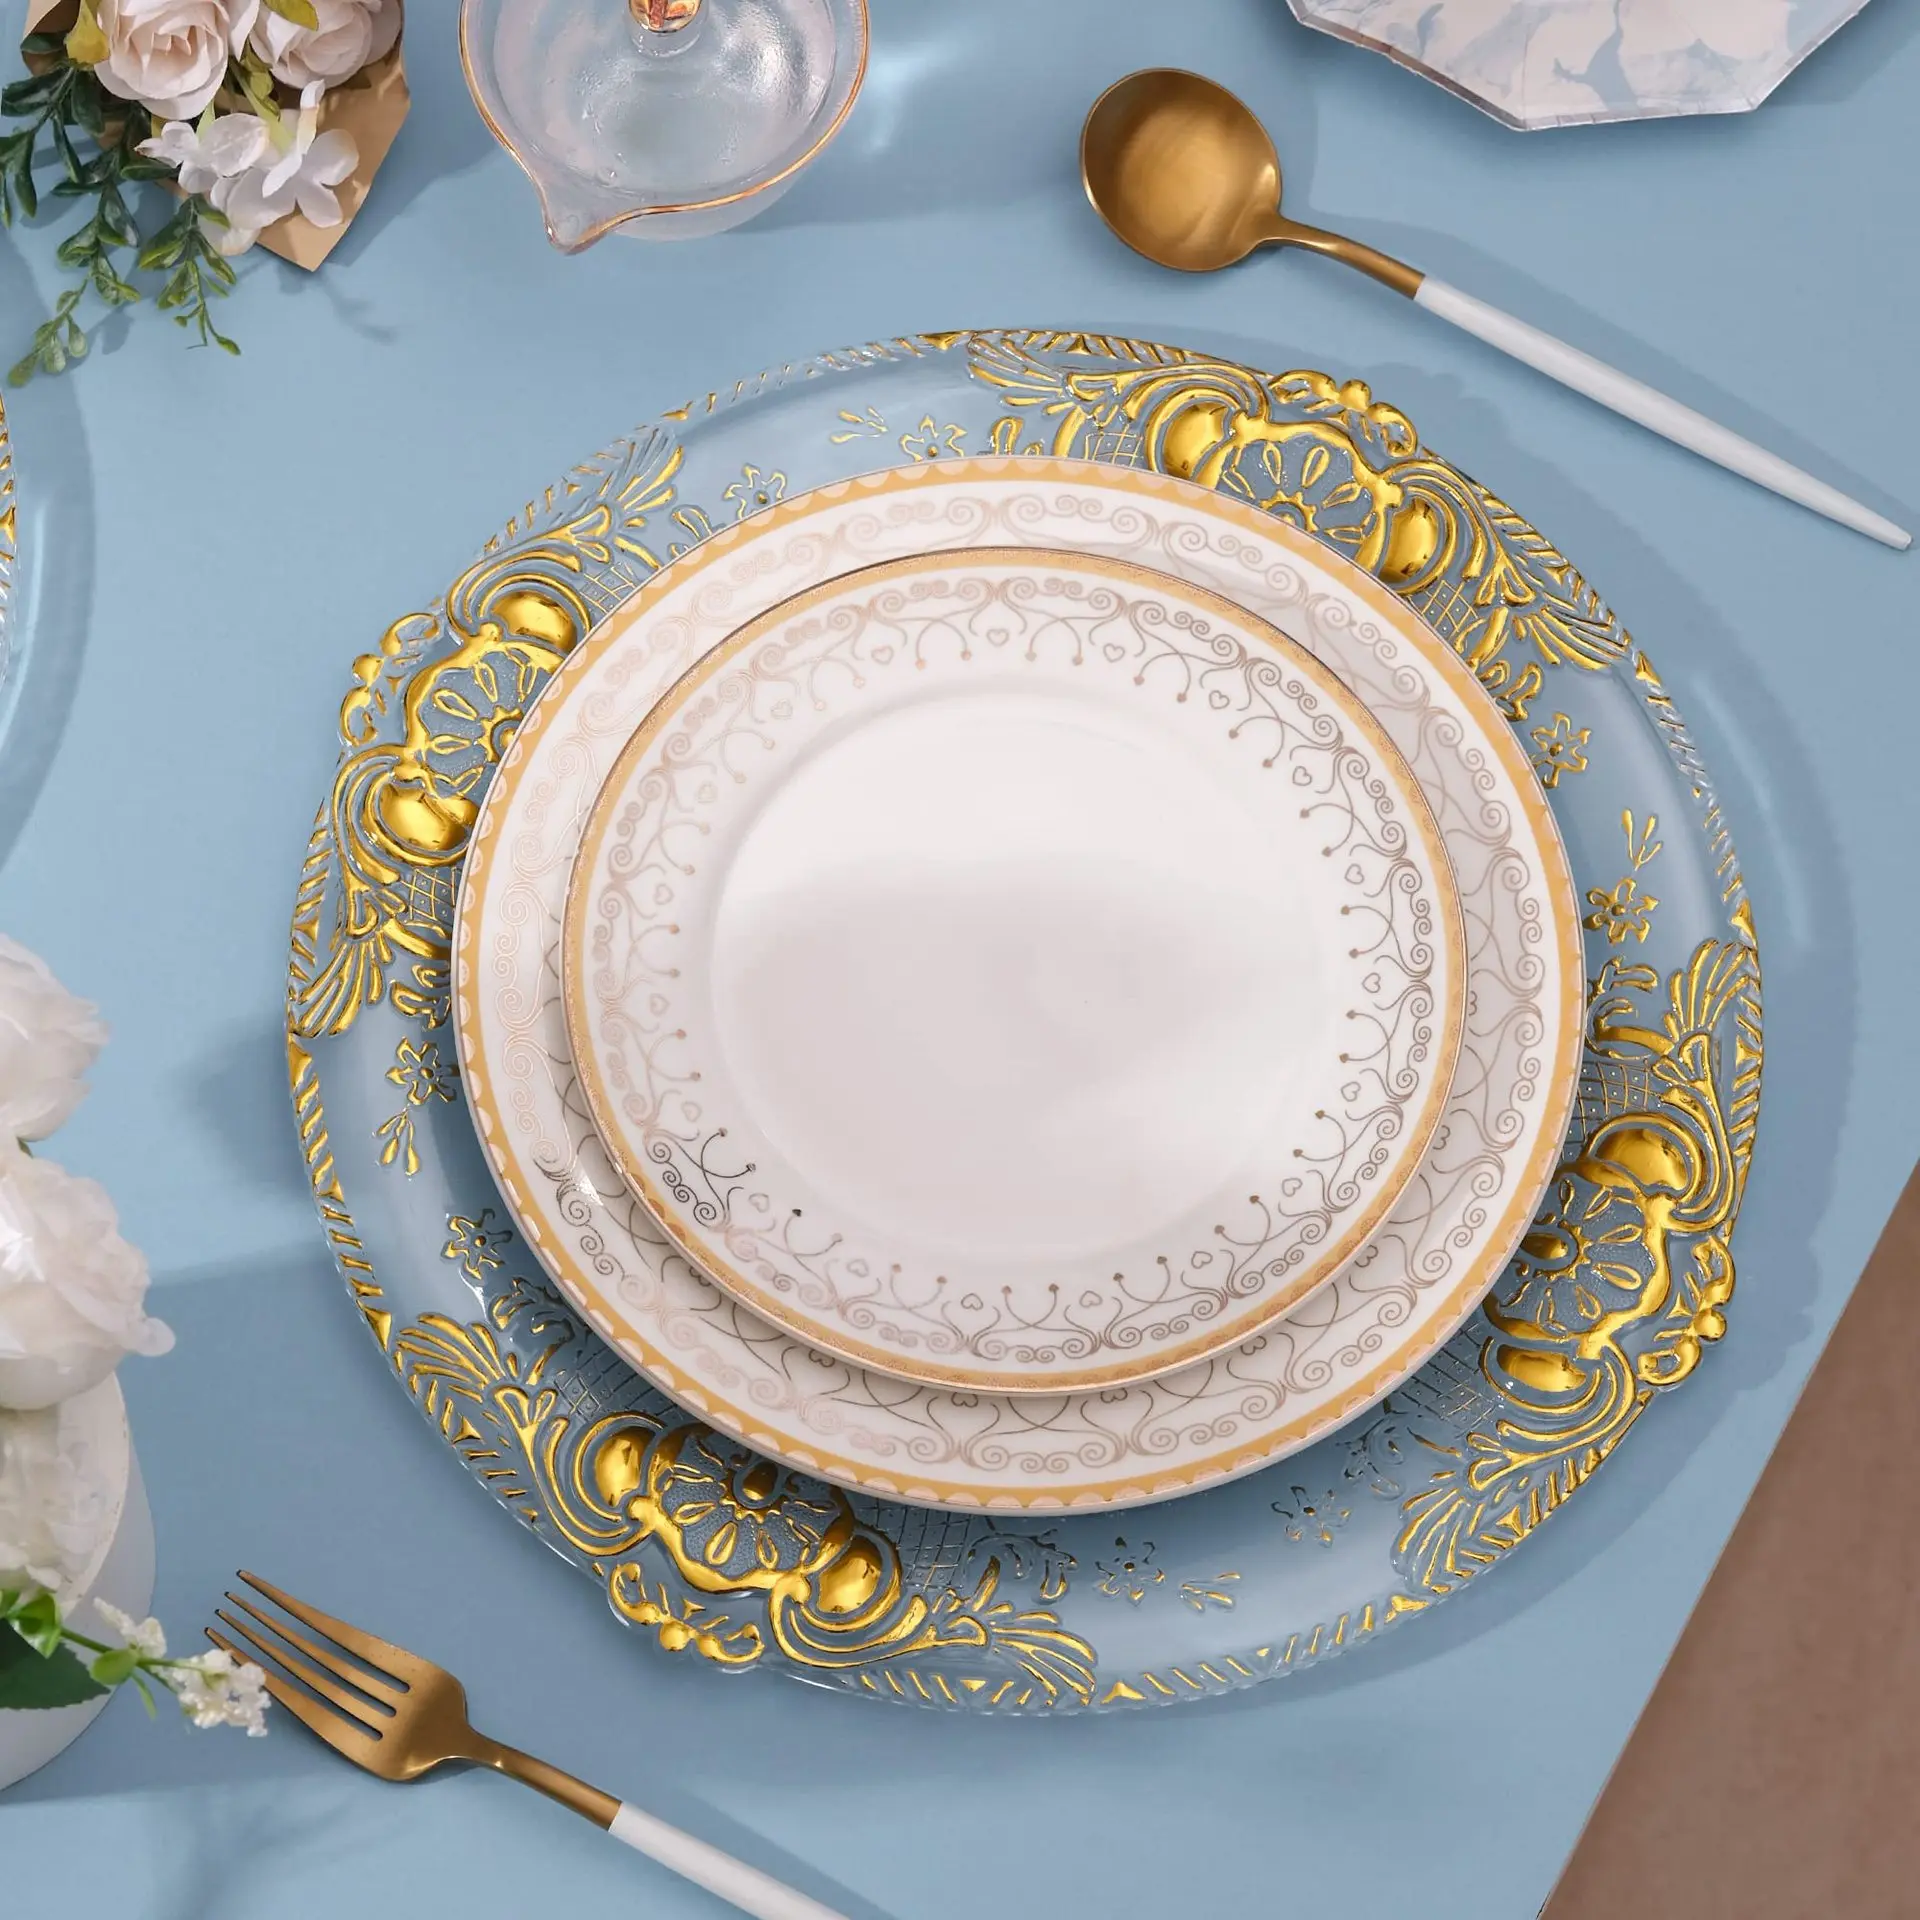 

60pcs Wedding Decor Table Place Settin 13Inches Charger Plastic Decorative Service Plate Gold Silver Dinner Serving